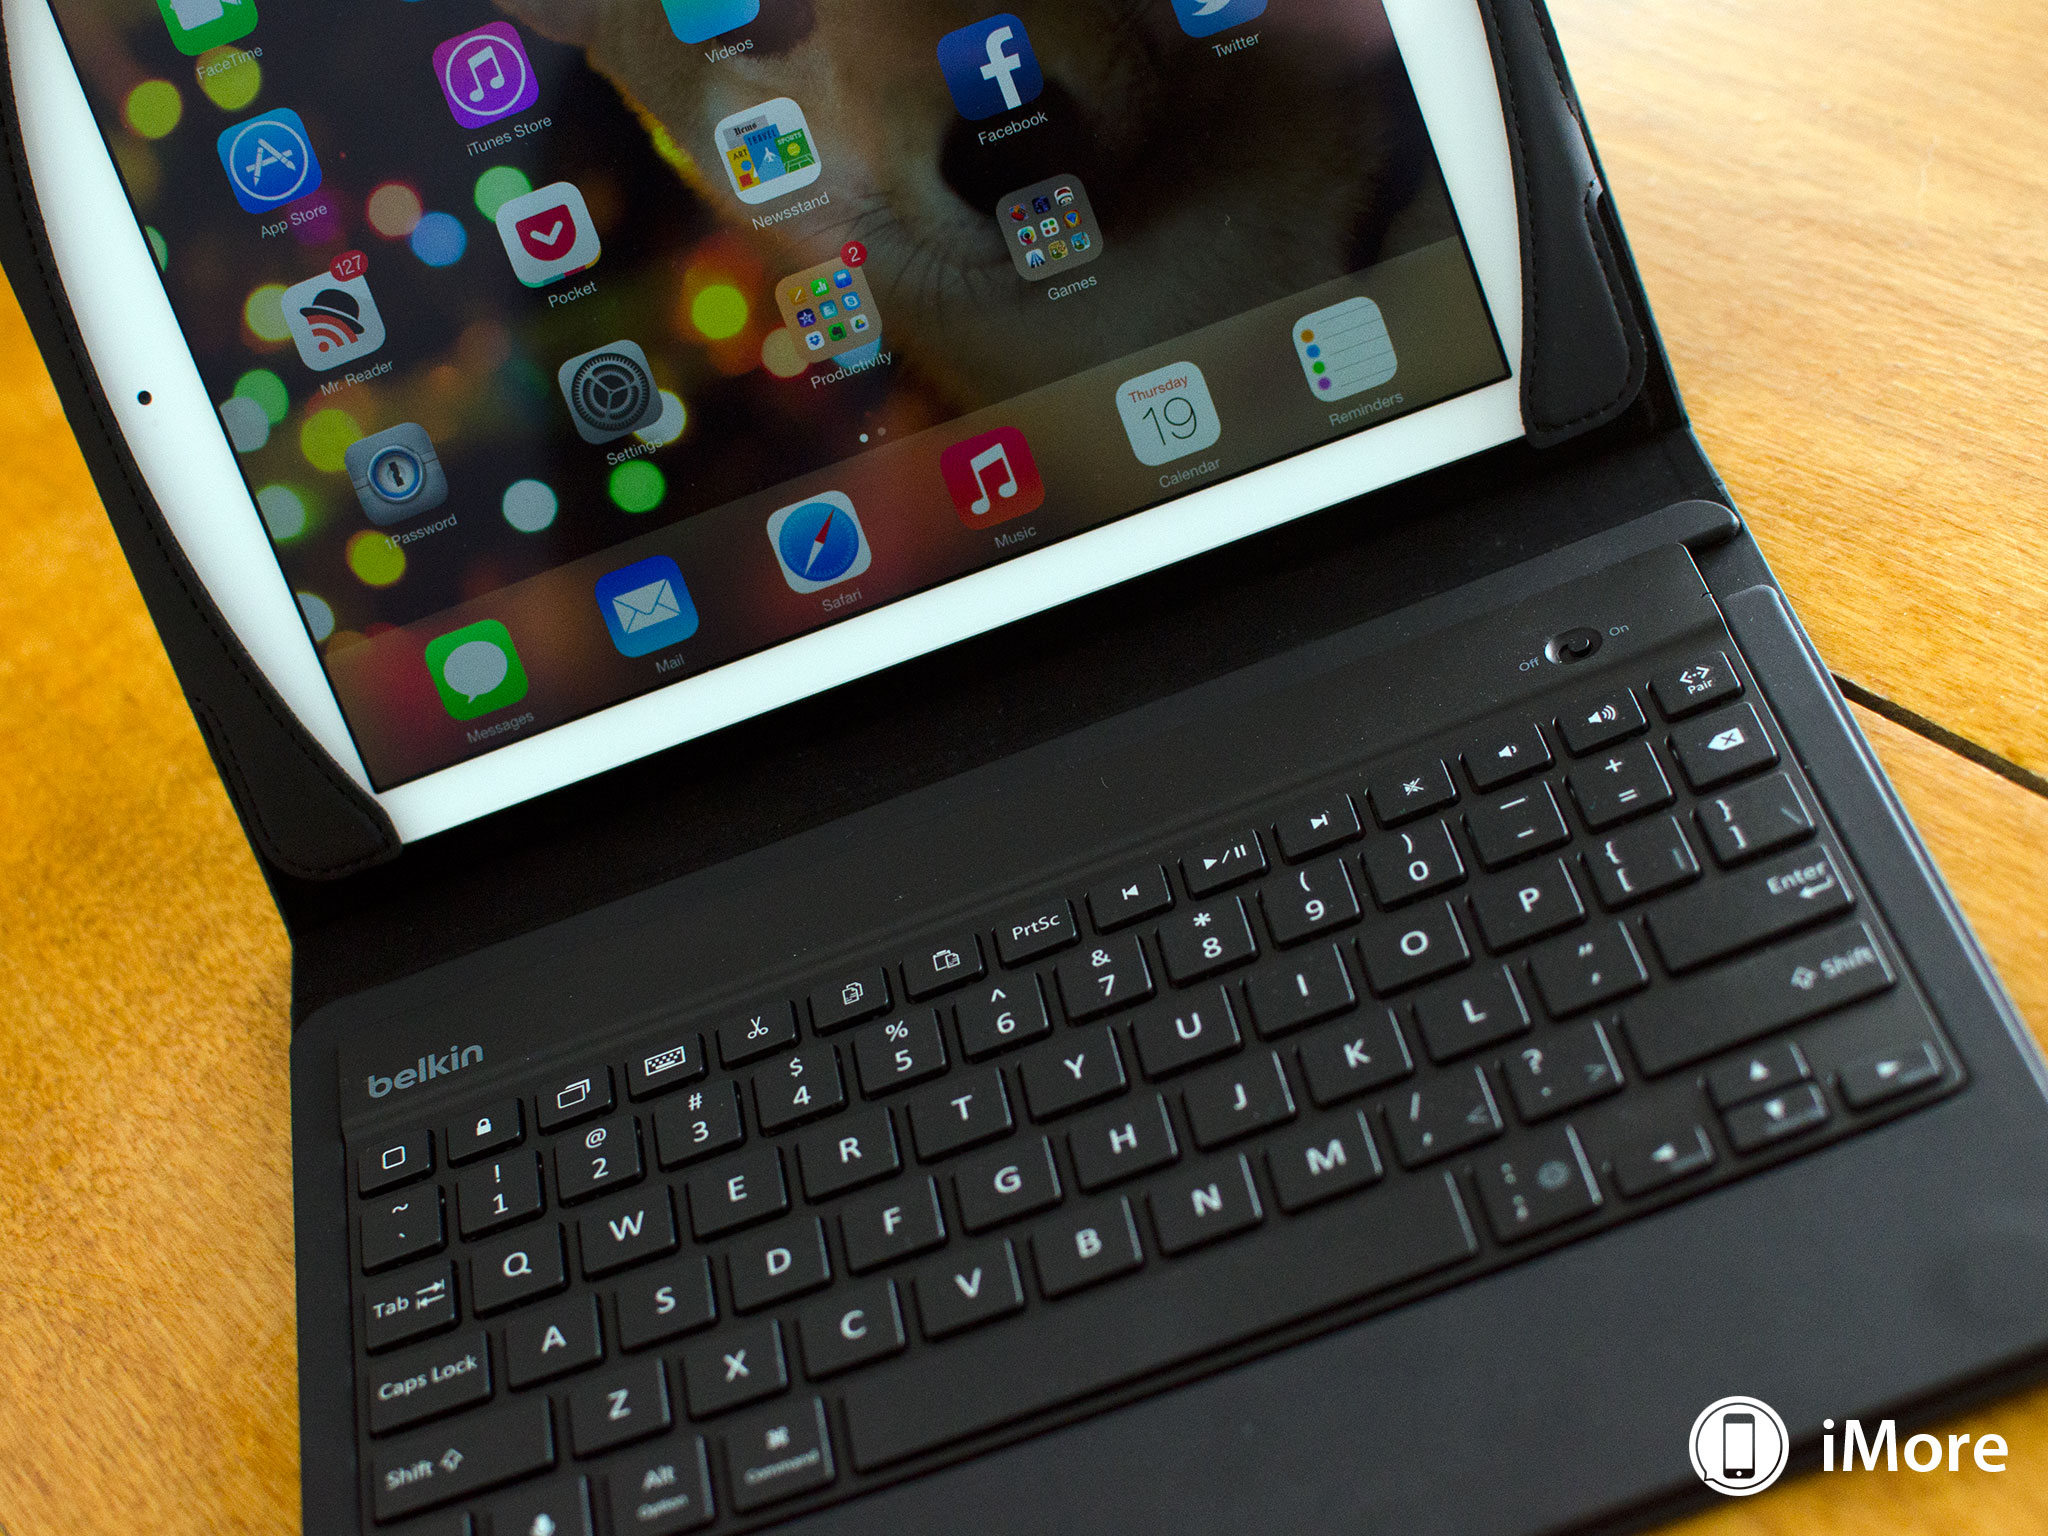 QODE Belkin Slim Style Keyboard Case for iPad Air review